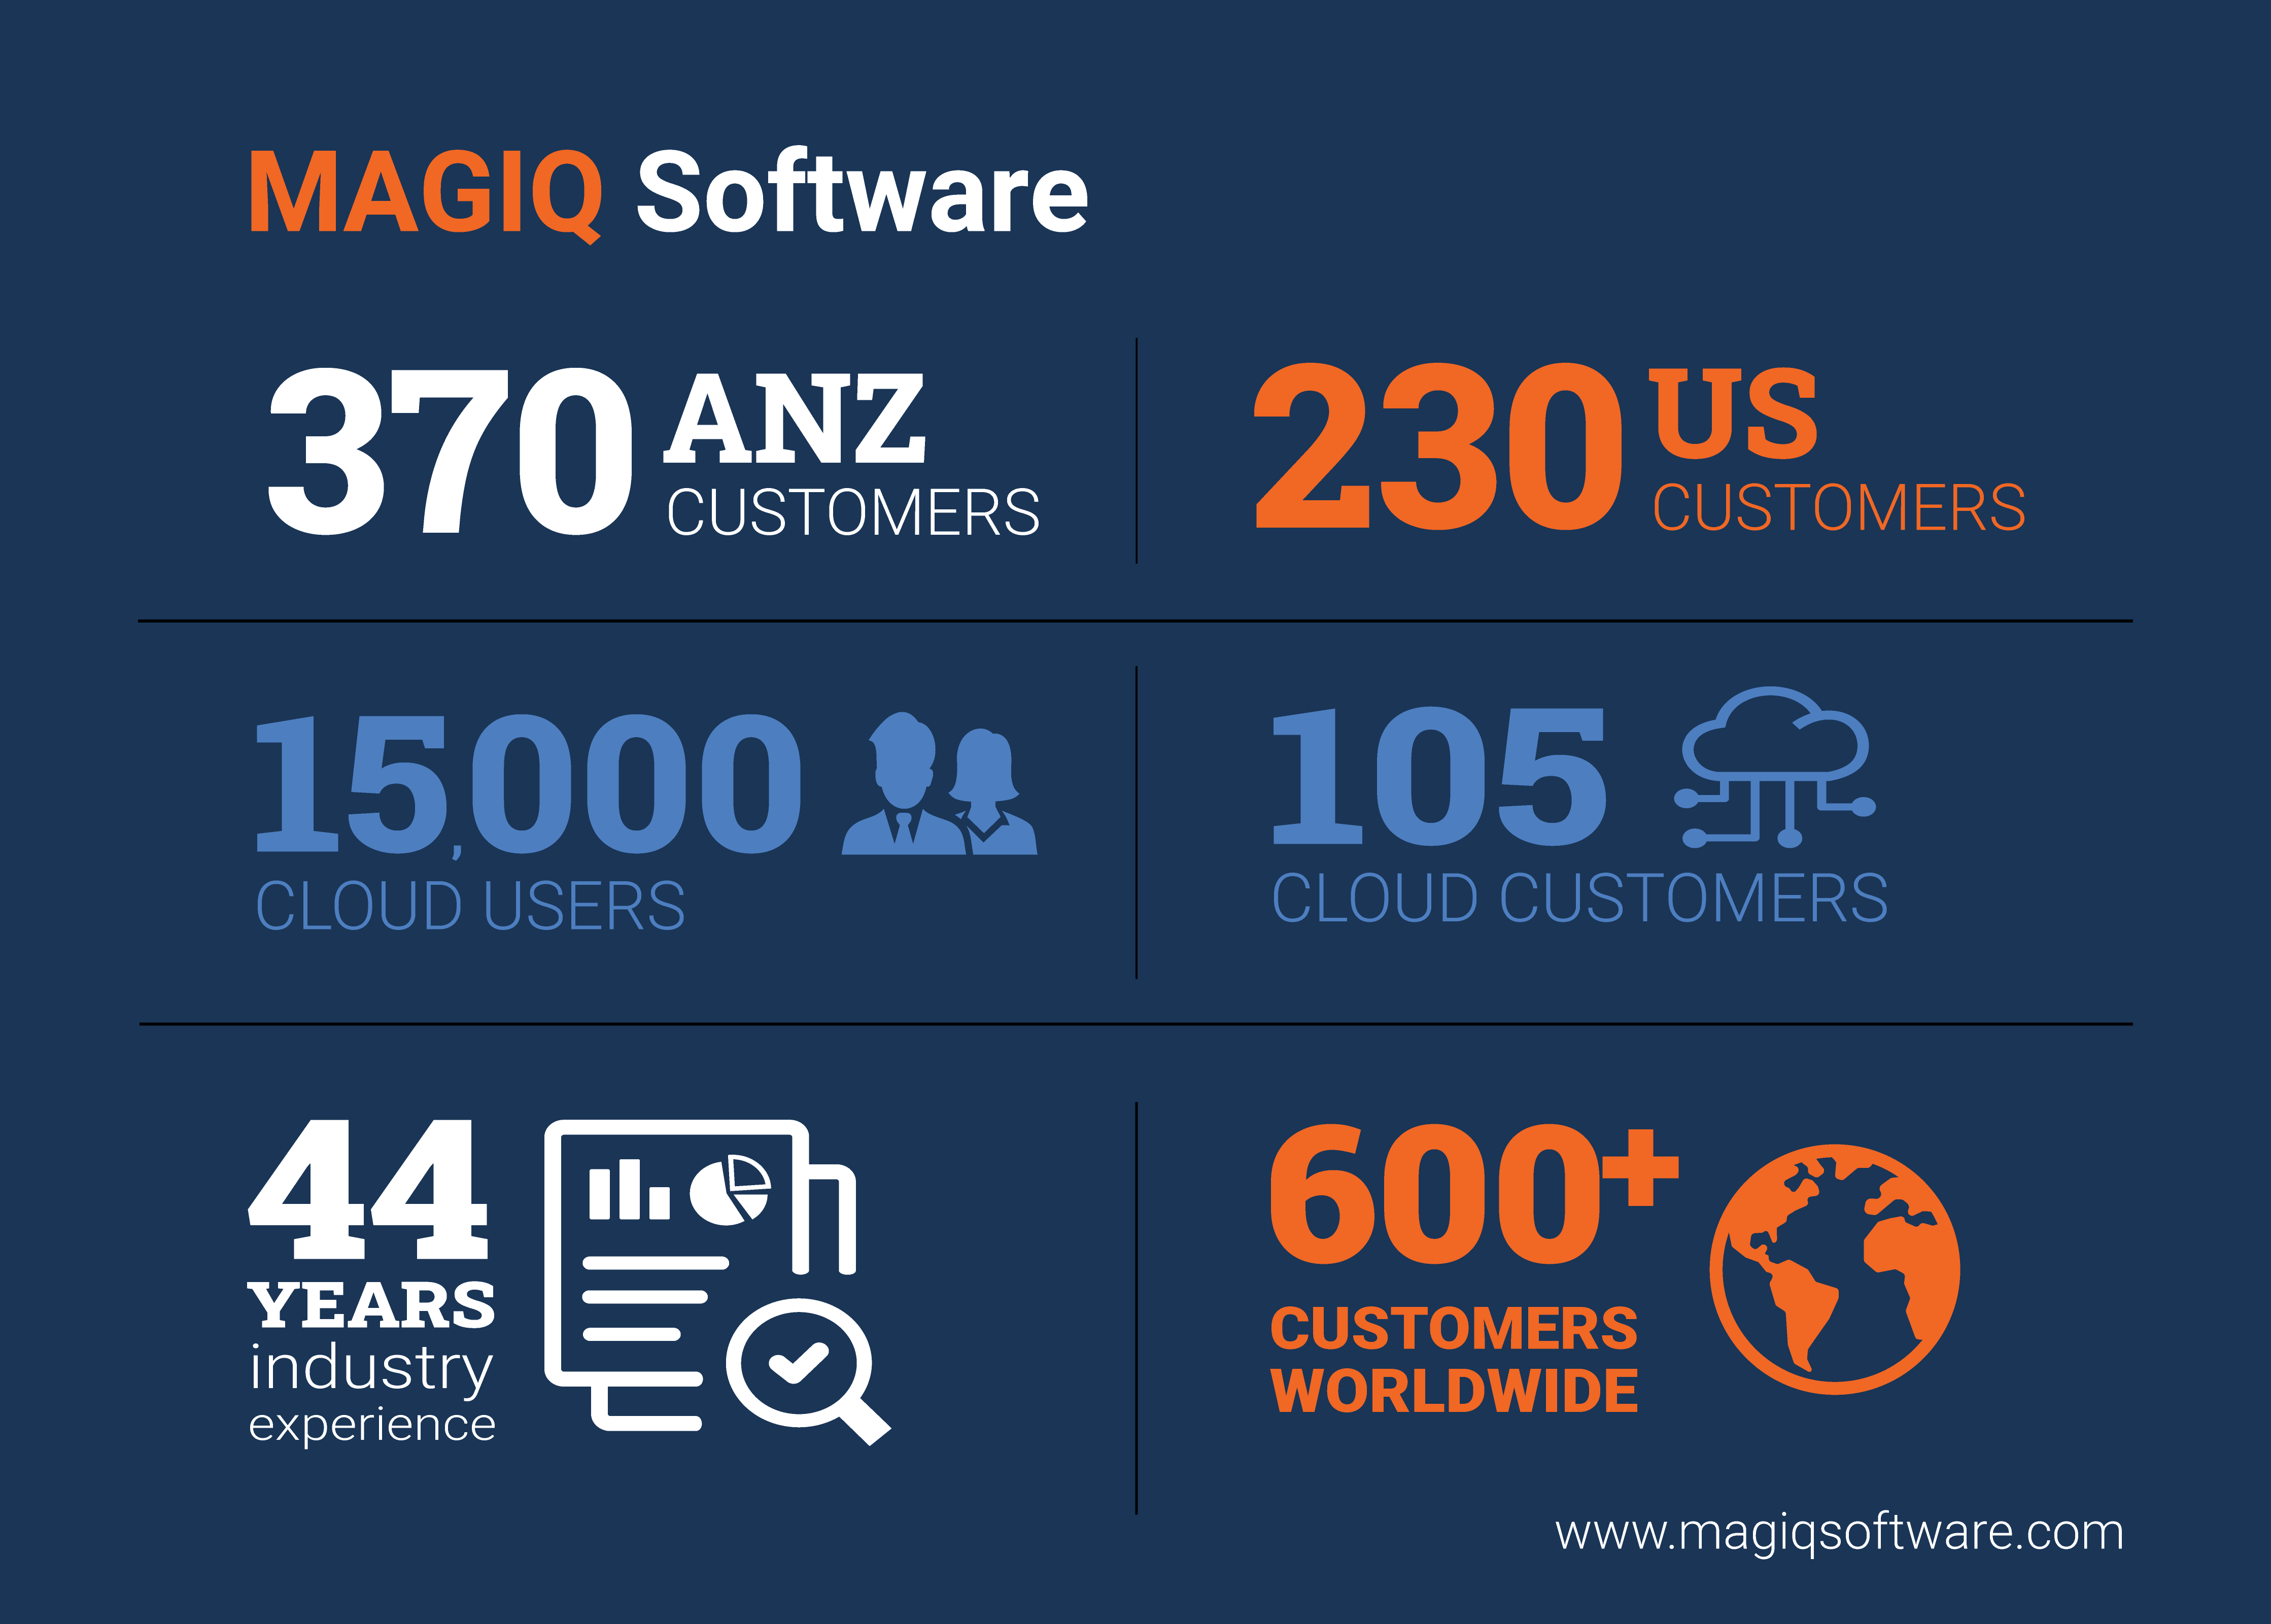 MAGIQ Software celebrates 44 years of providing software services to the public sector.